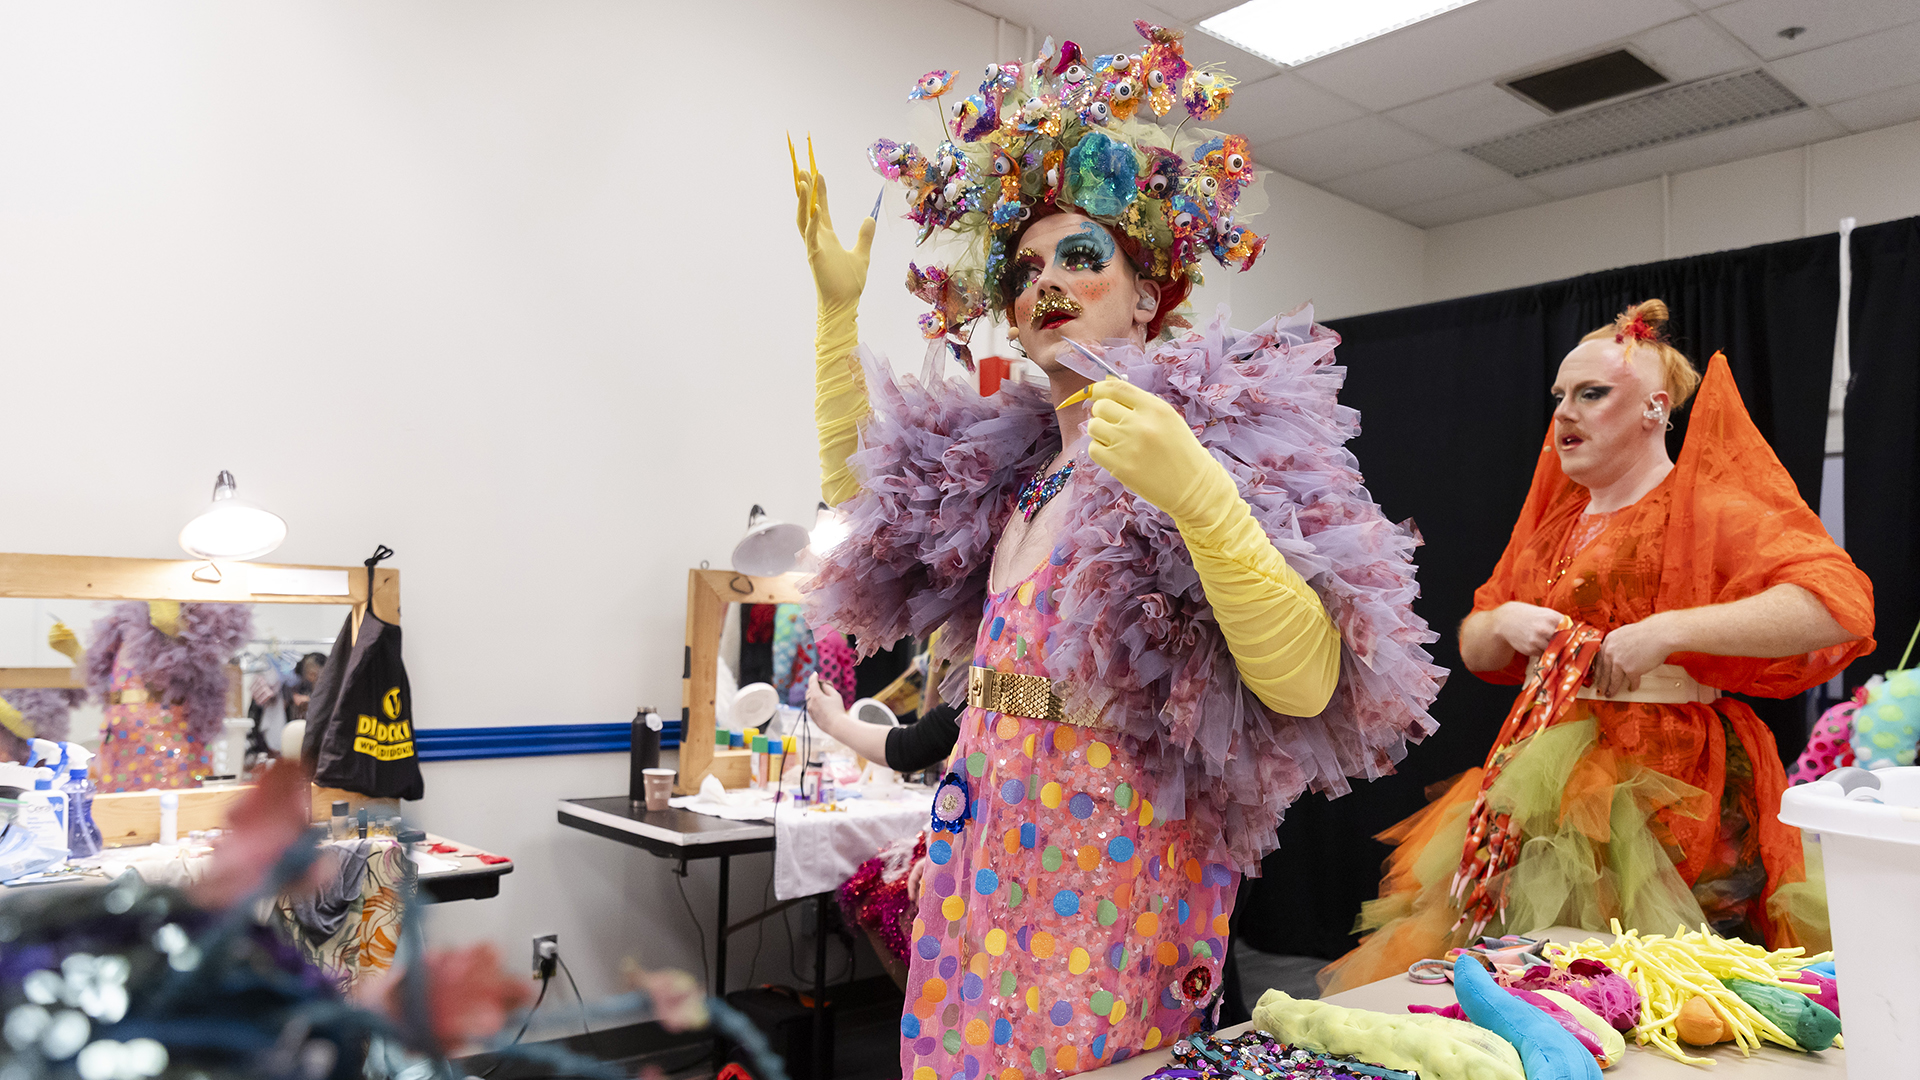 two performers get dressed in costumes in a dressing room — one person wearing a polkadot pink dress with a fluffy purple shrug made of tulle and headwear with fake eyeballs popping out of it and the other person in a bright orange top with a big colorful skirt